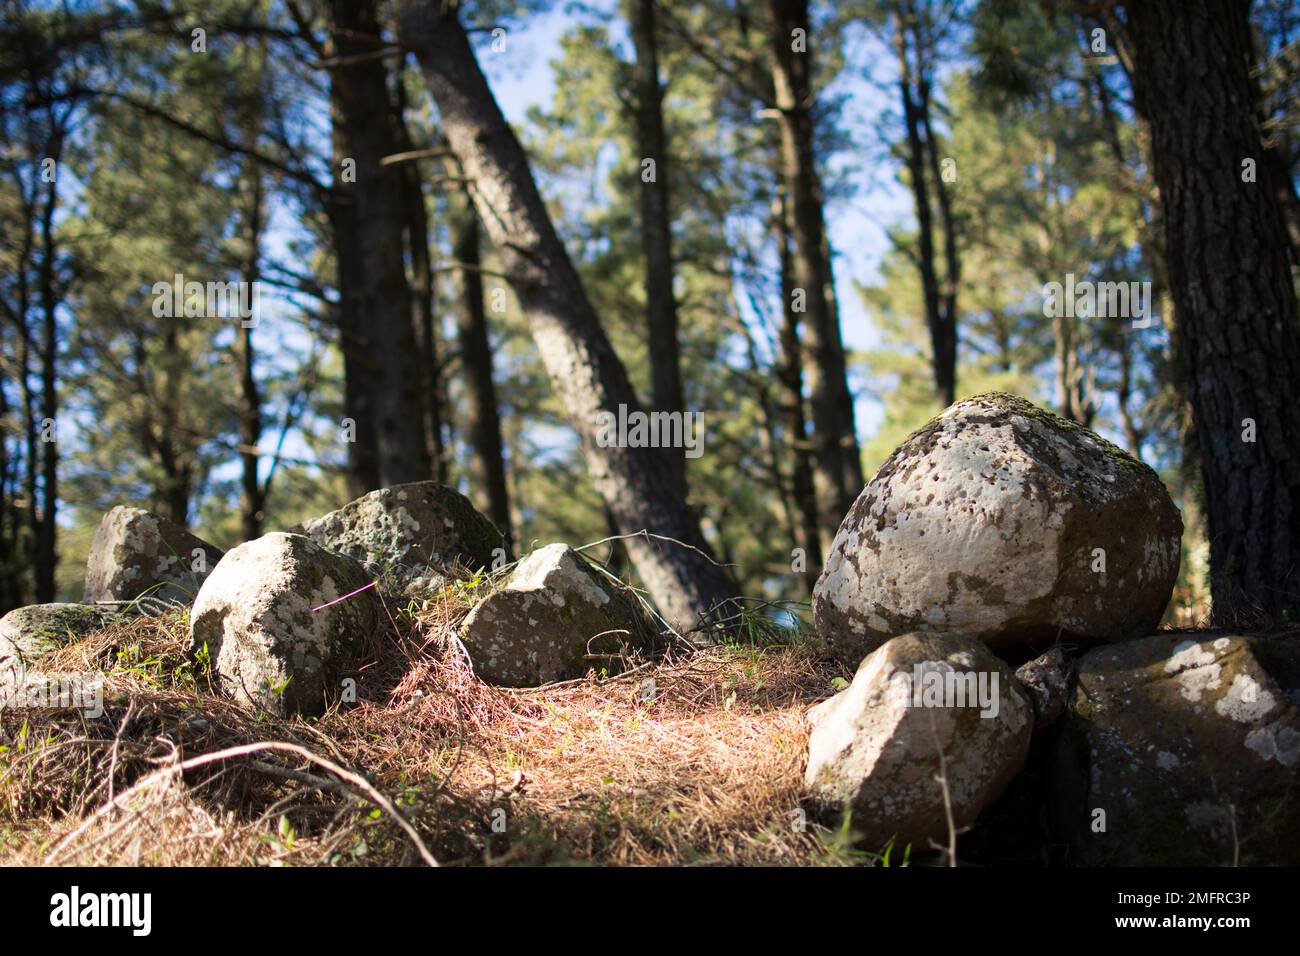 Stones in the foreground on a blurred forest background Stock Photo